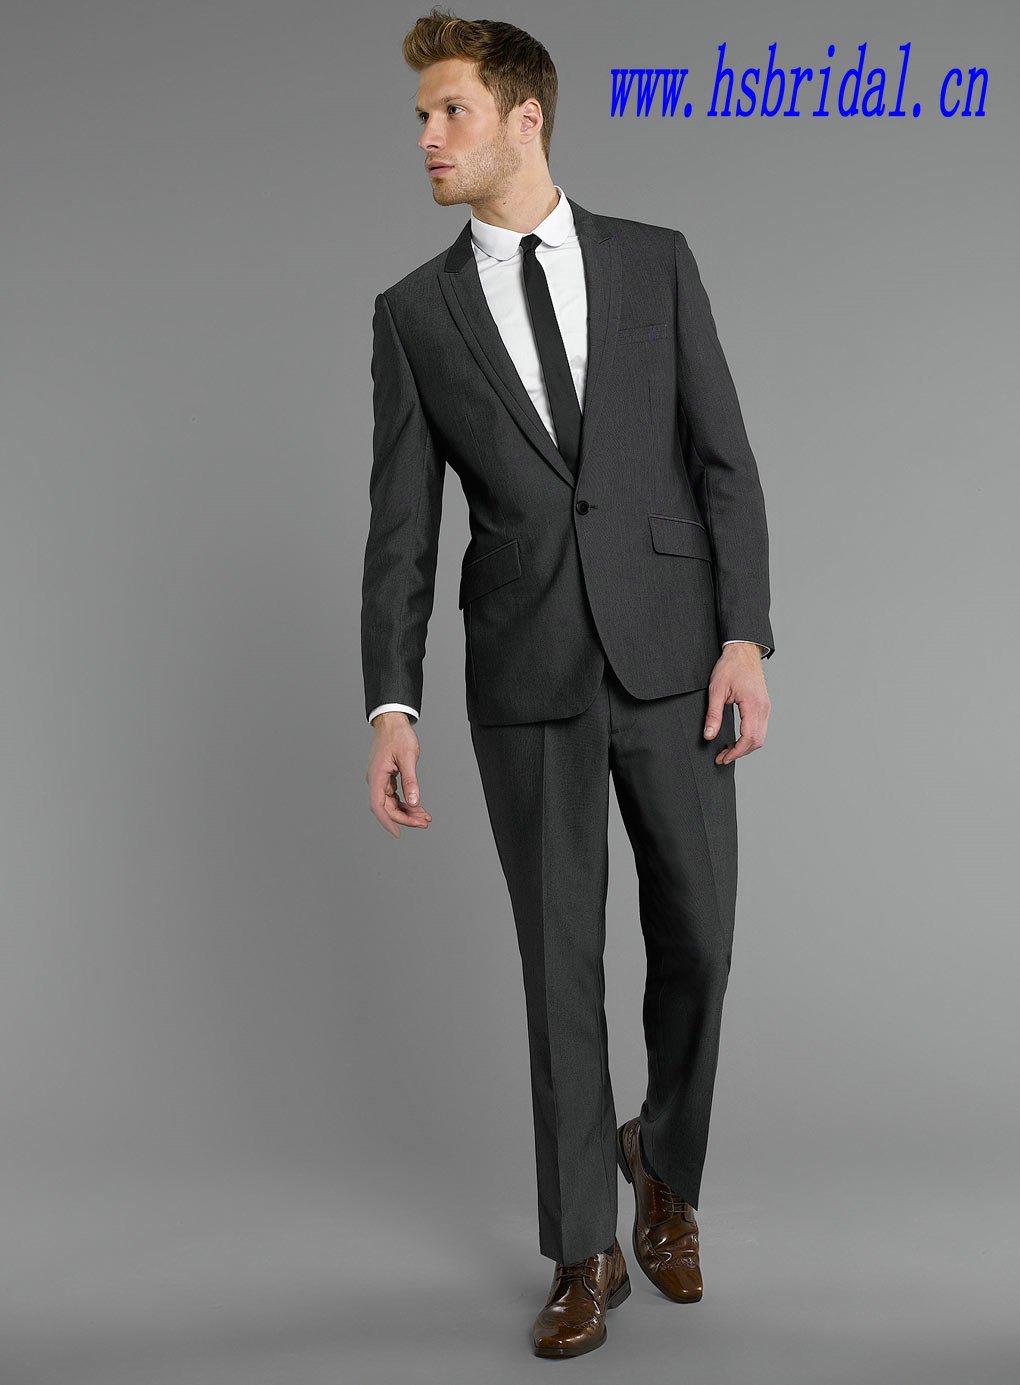 classic wedding suits for men